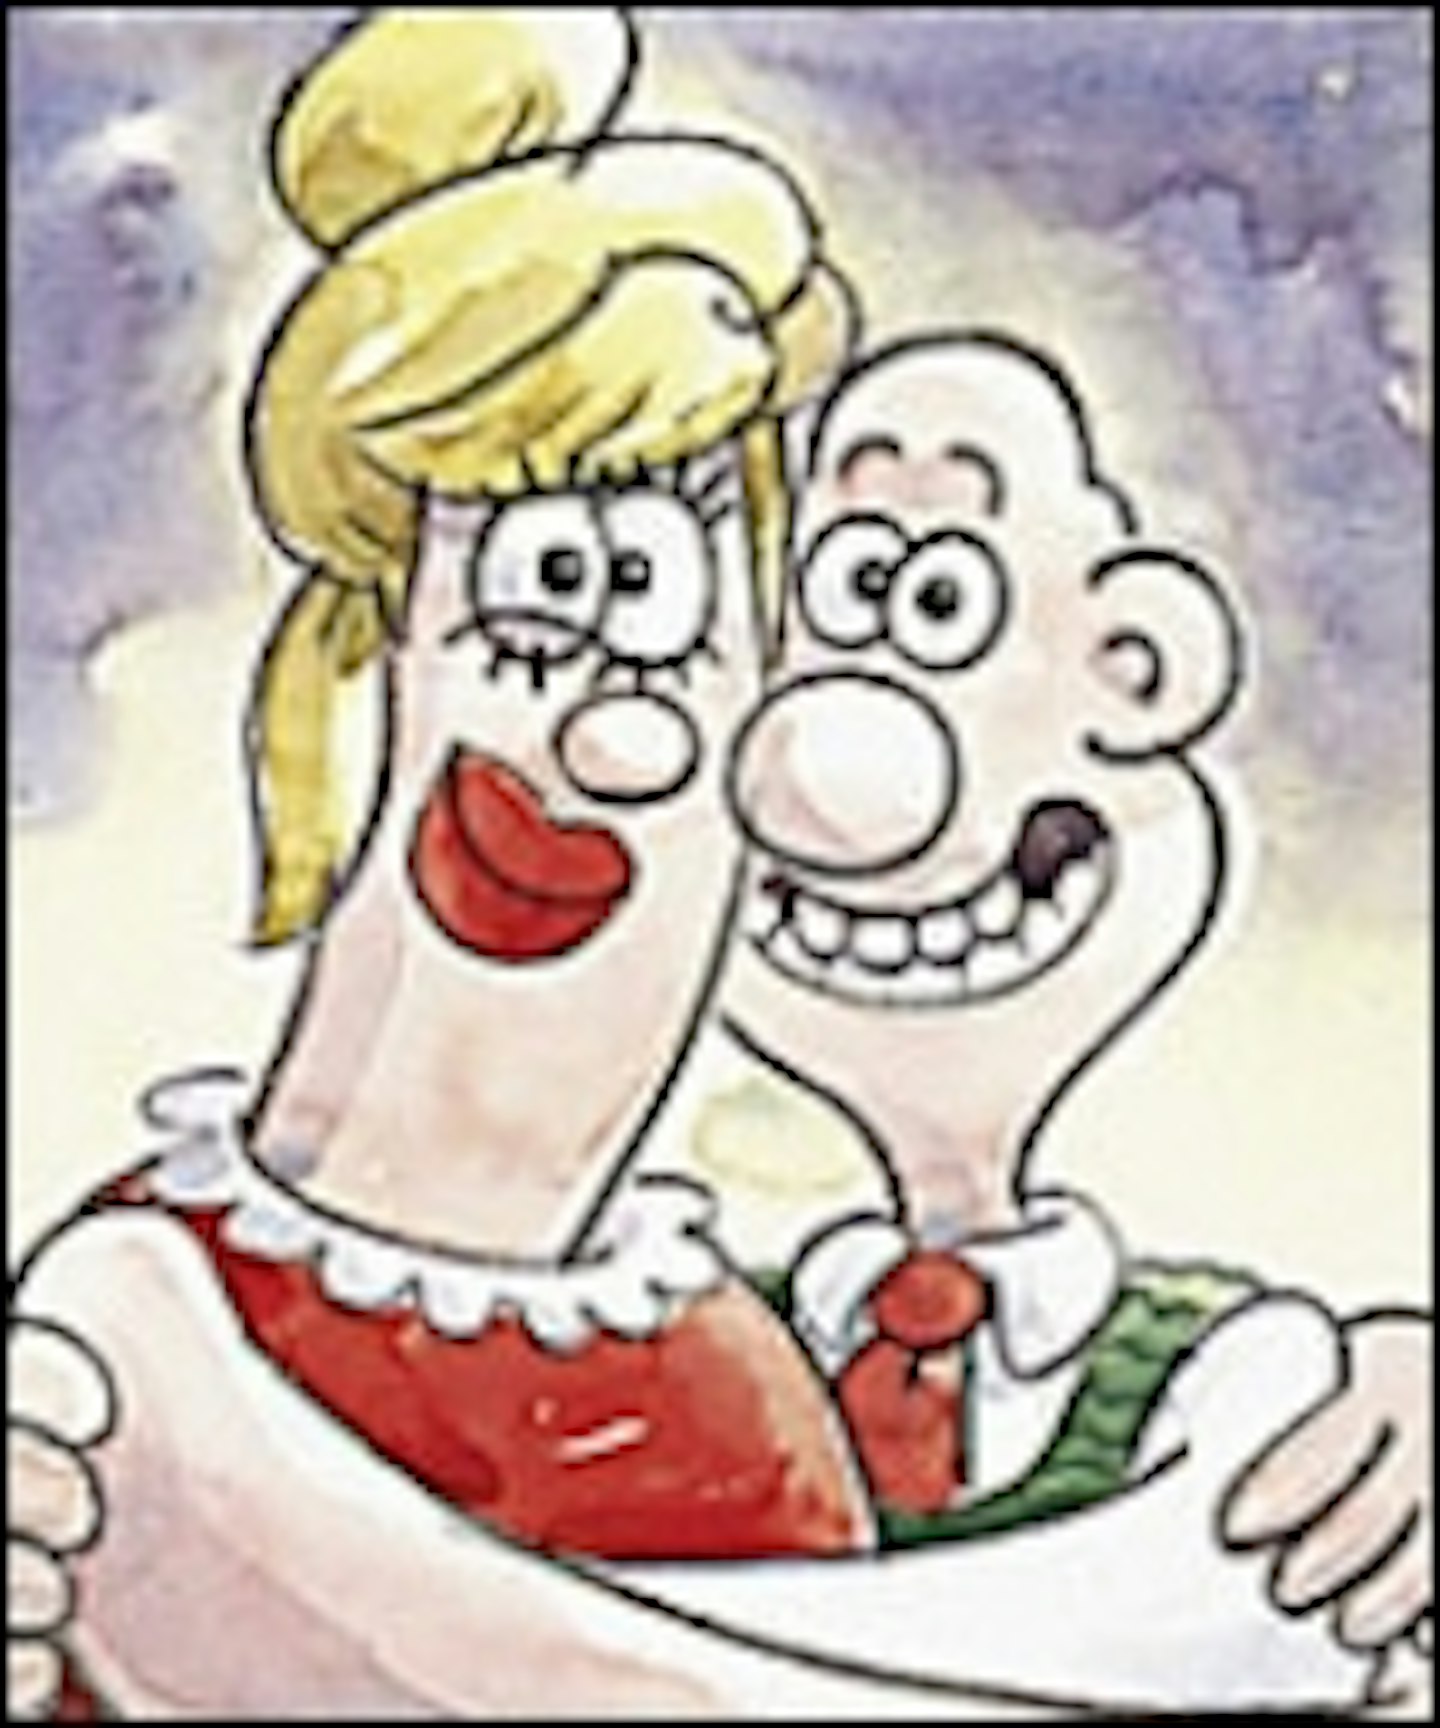 New Wallace & Gromit Gets Love Interest